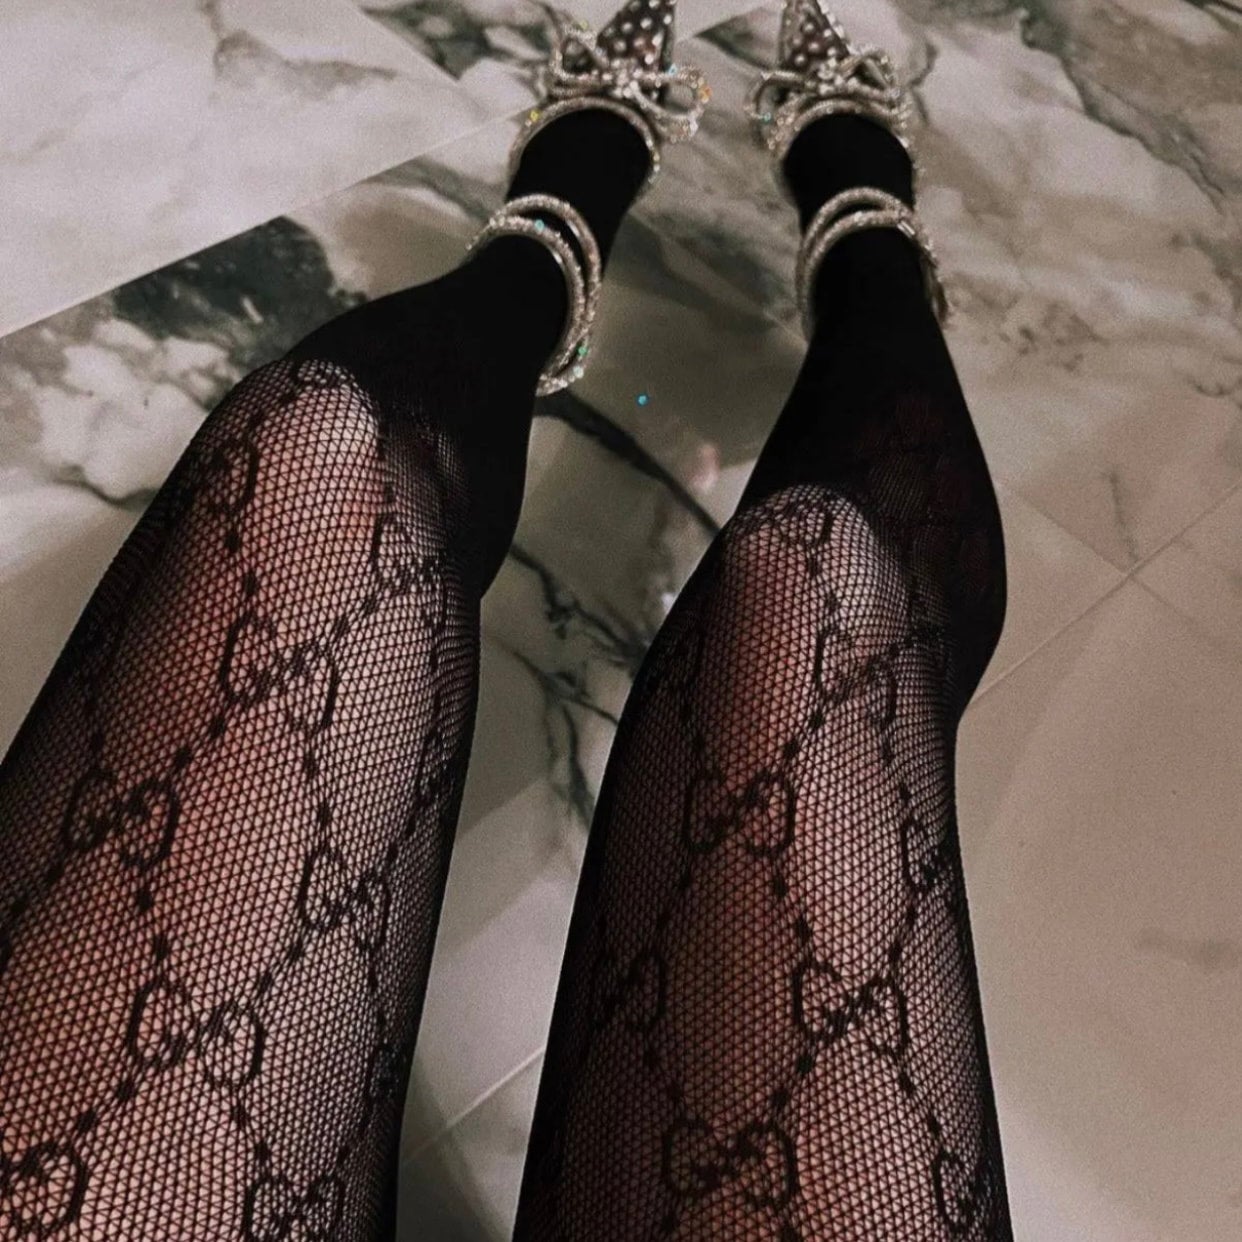 GG” Inspired Tights